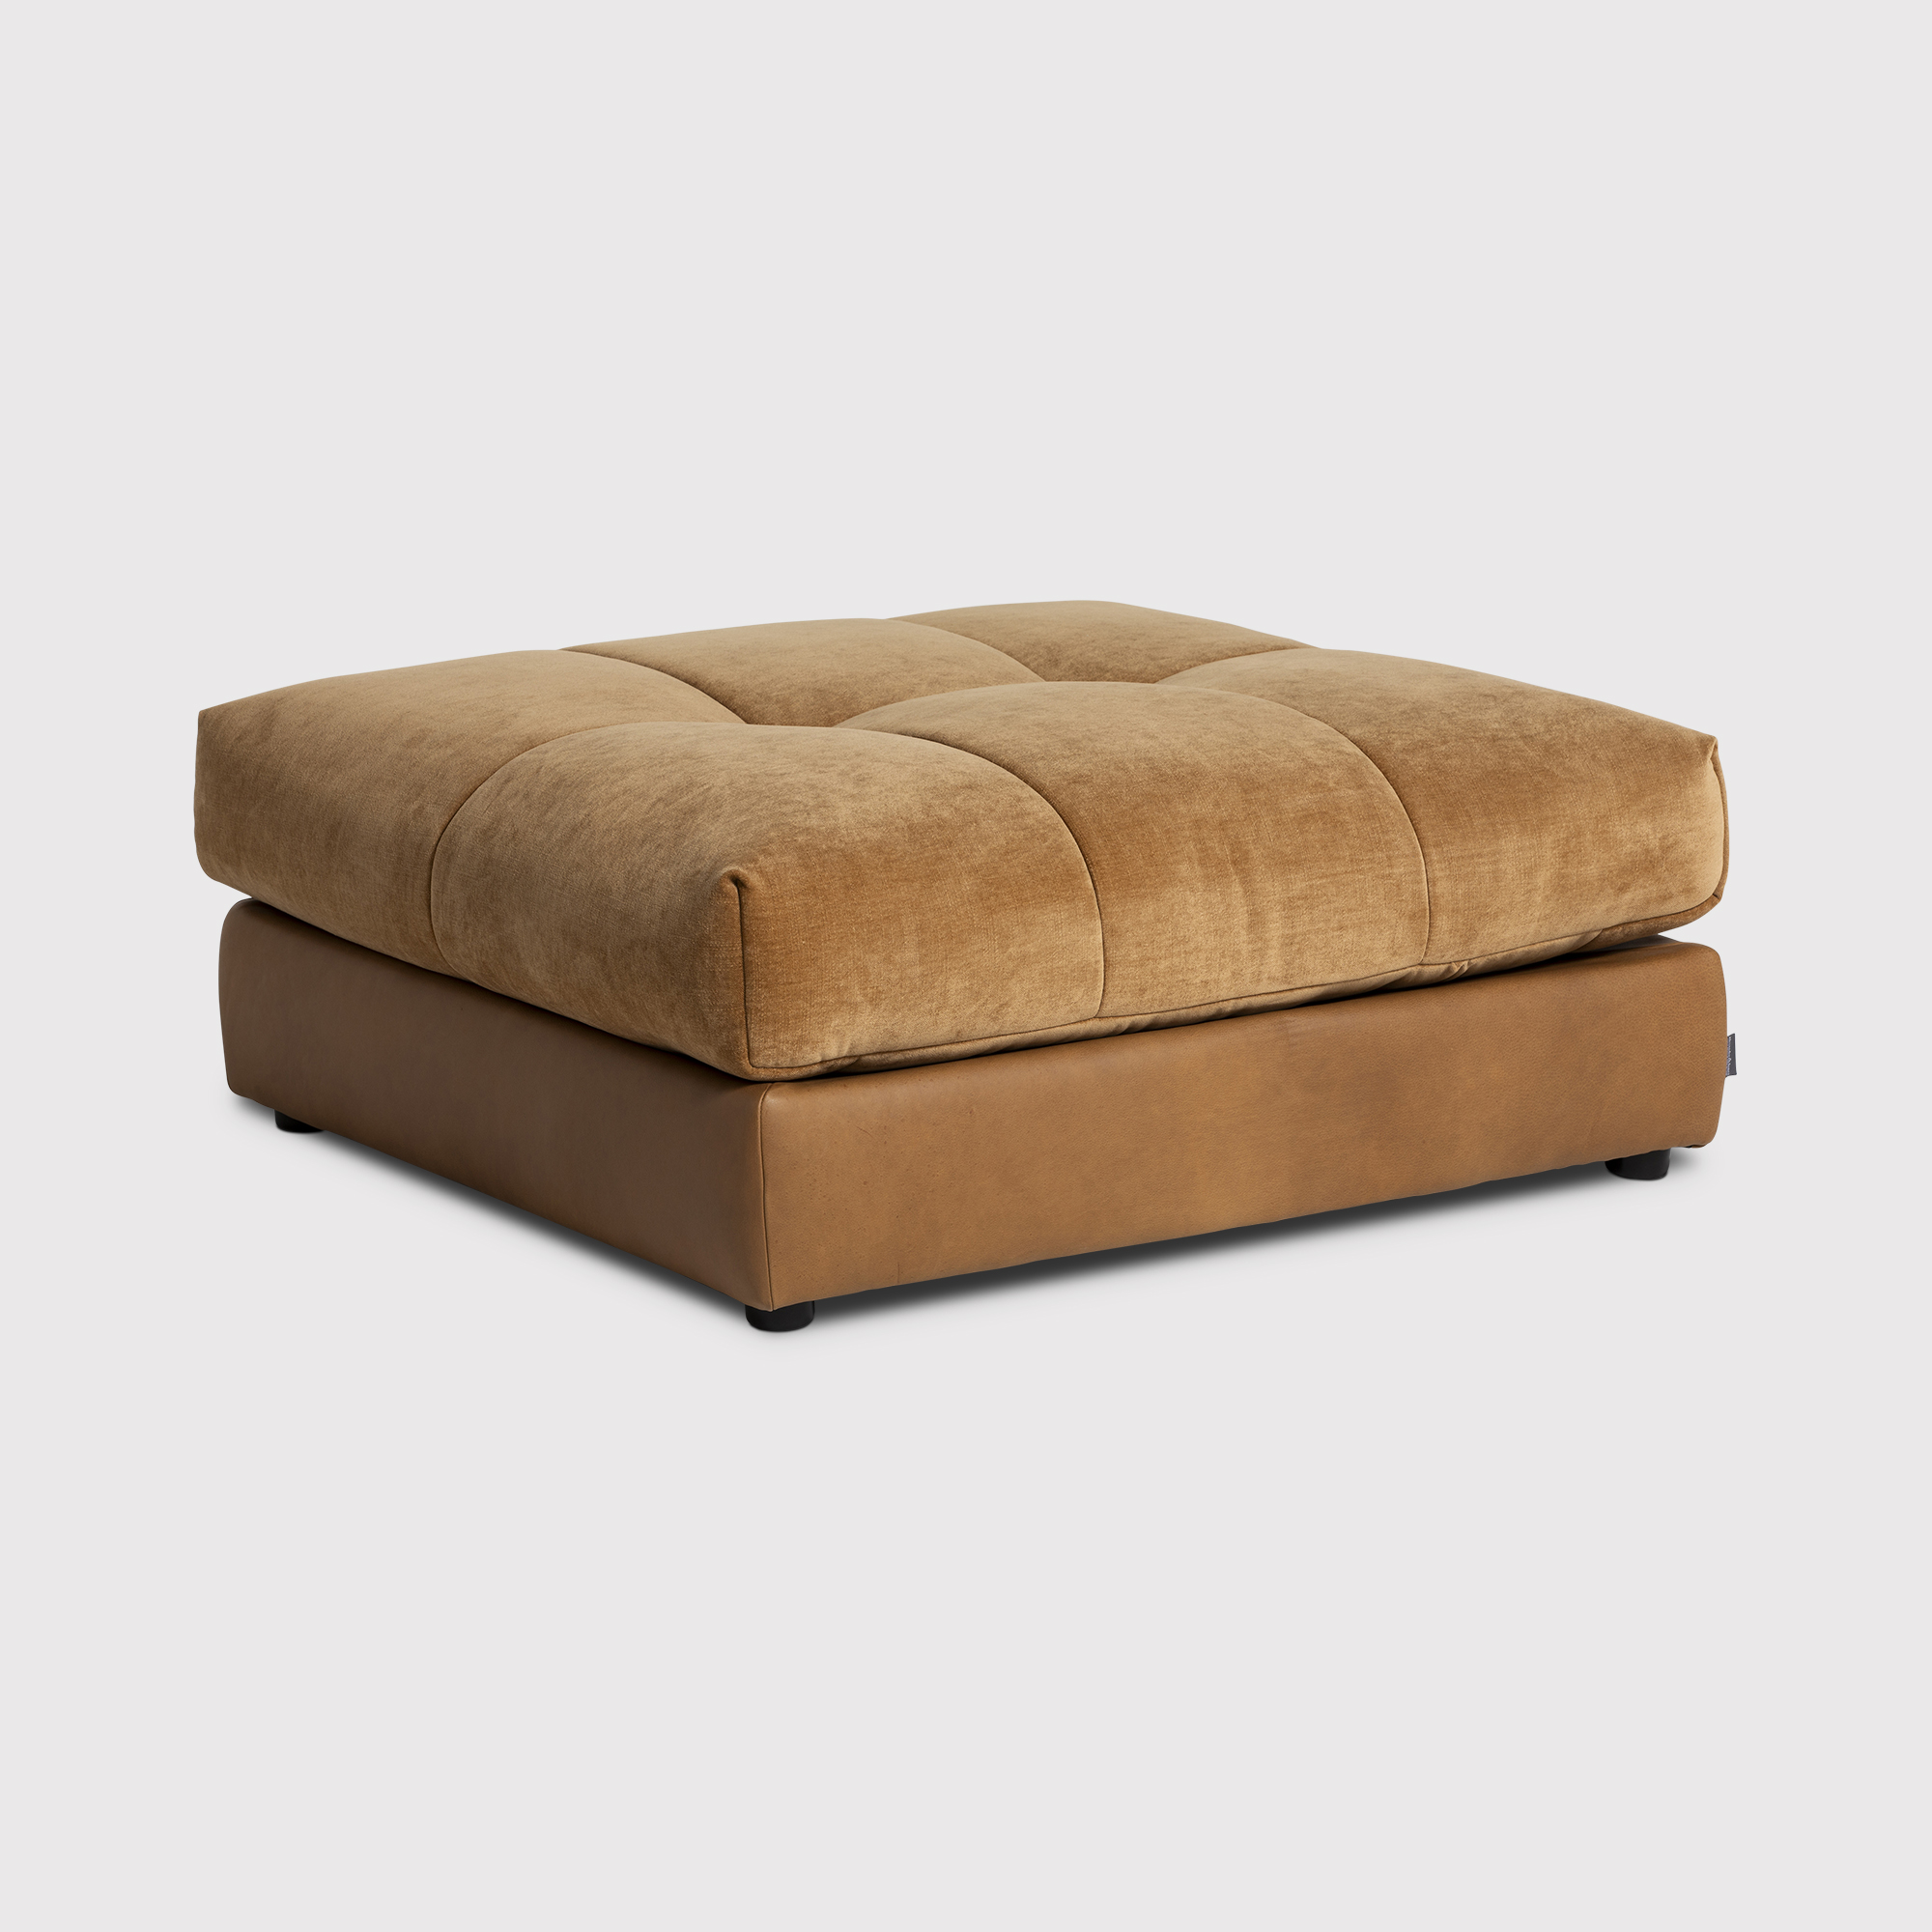 Roby Footstool, Brown Fabric & Leather | Barker & Stonehouse